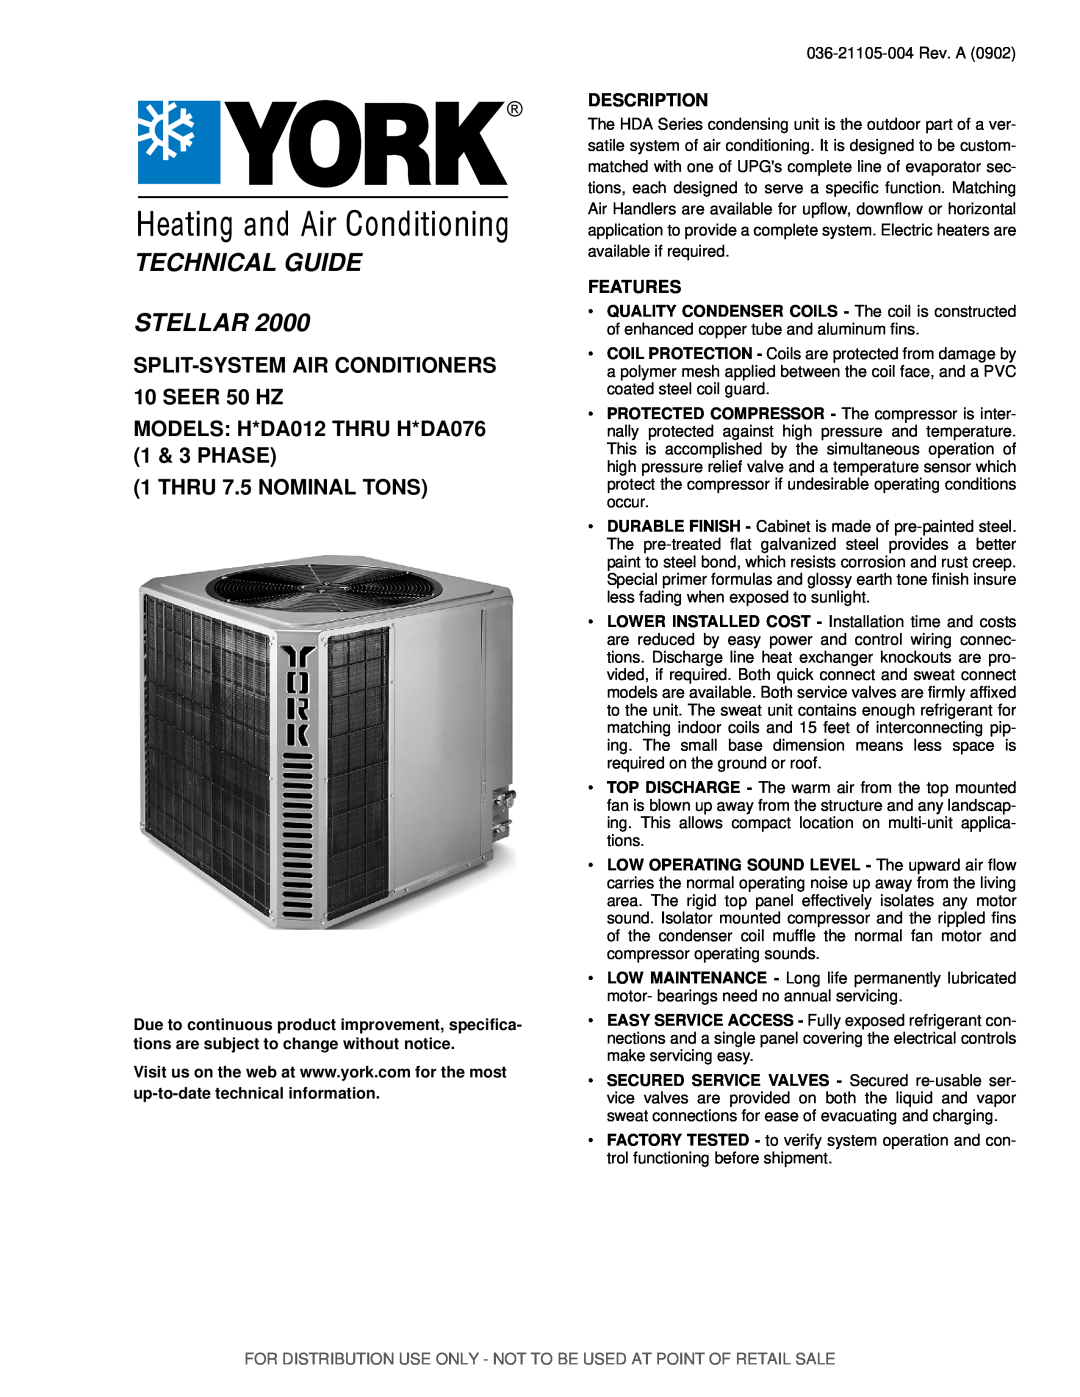 York H*DA012 specifications Description, Features, Technical Guide Stellar, SPLIT-SYSTEMAIR CONDITIONERS 10 SEER 50 HZ 